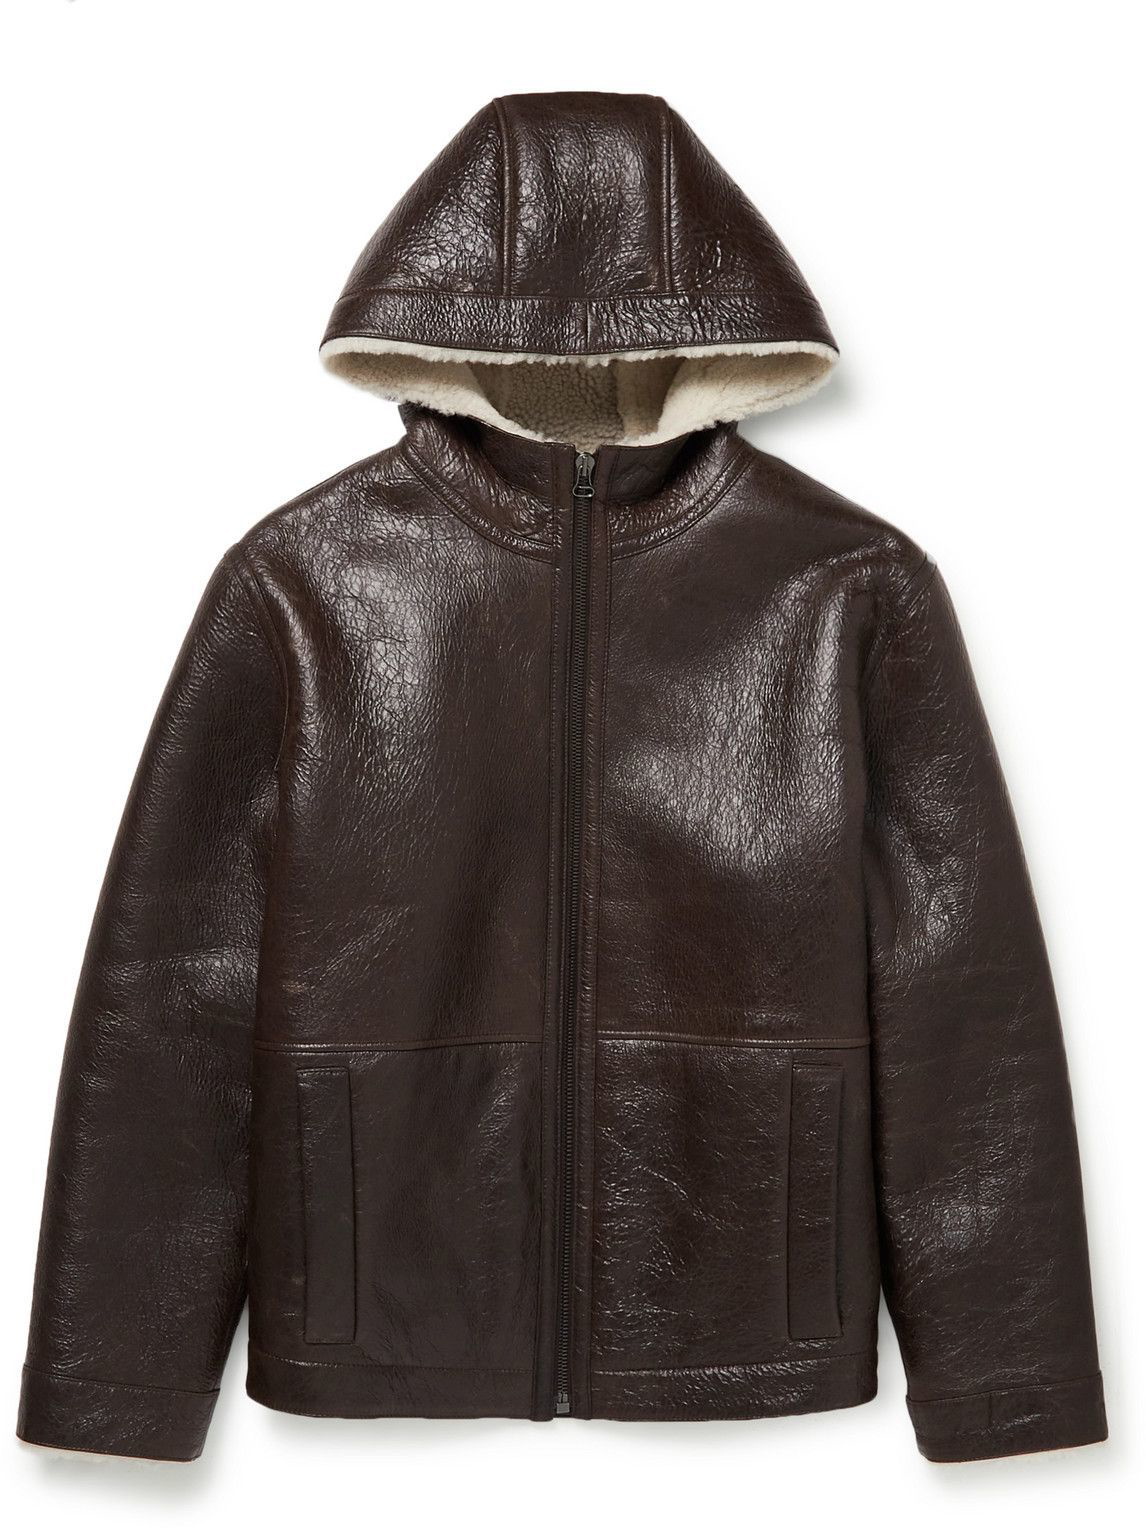 Photo: Yves Salomon - Shearling-Lined Leather Jacket - Brown